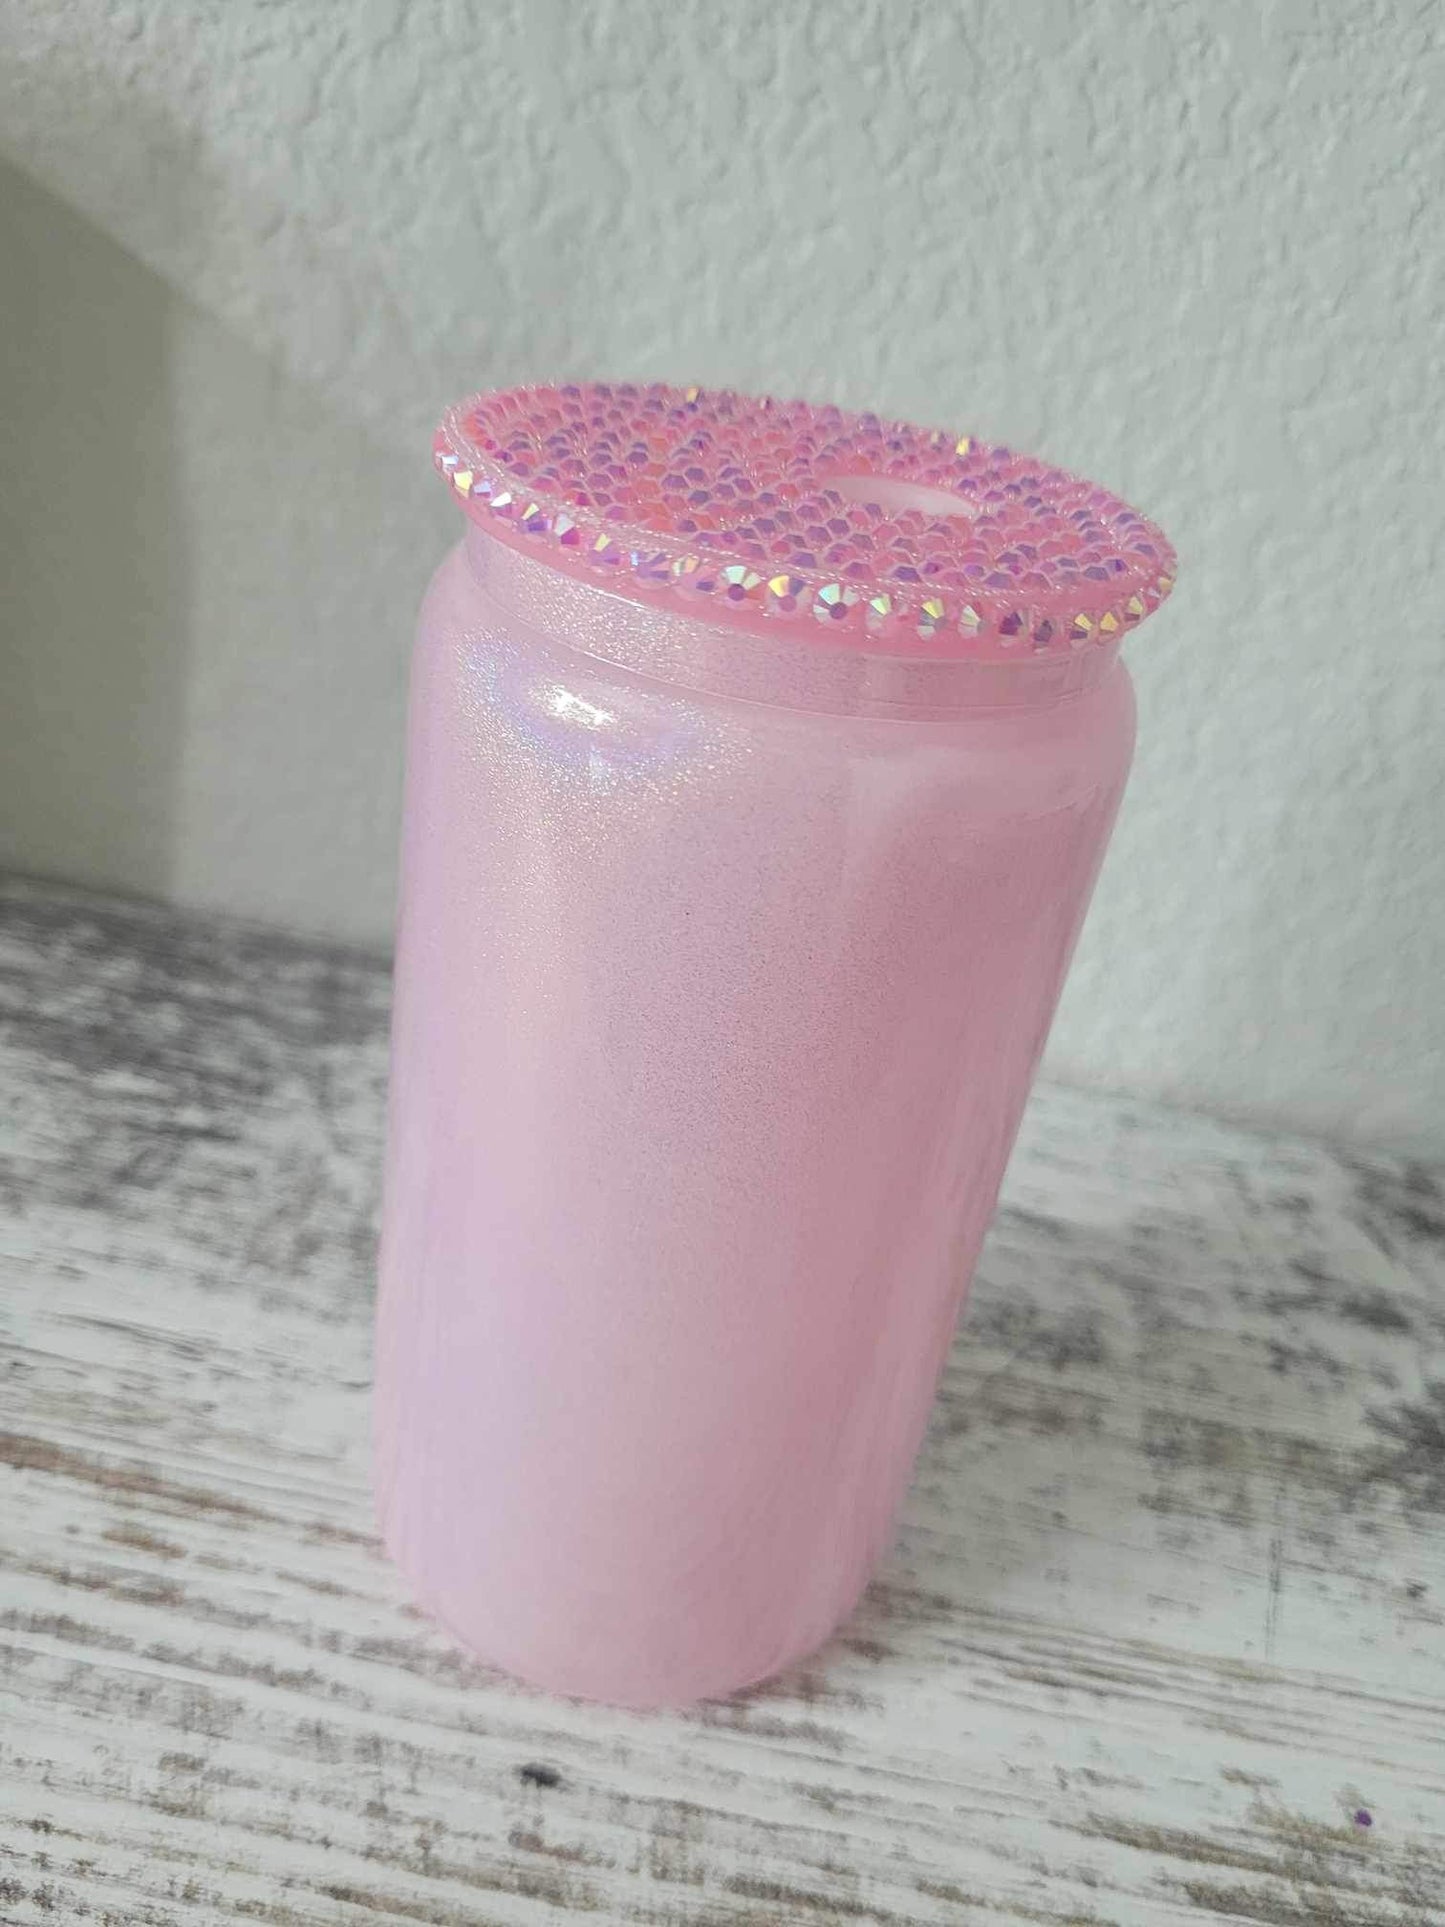 16oz Shimmer Holographic Can style, Comes with Iridescent Rhinestone Lid!Ships from the USA